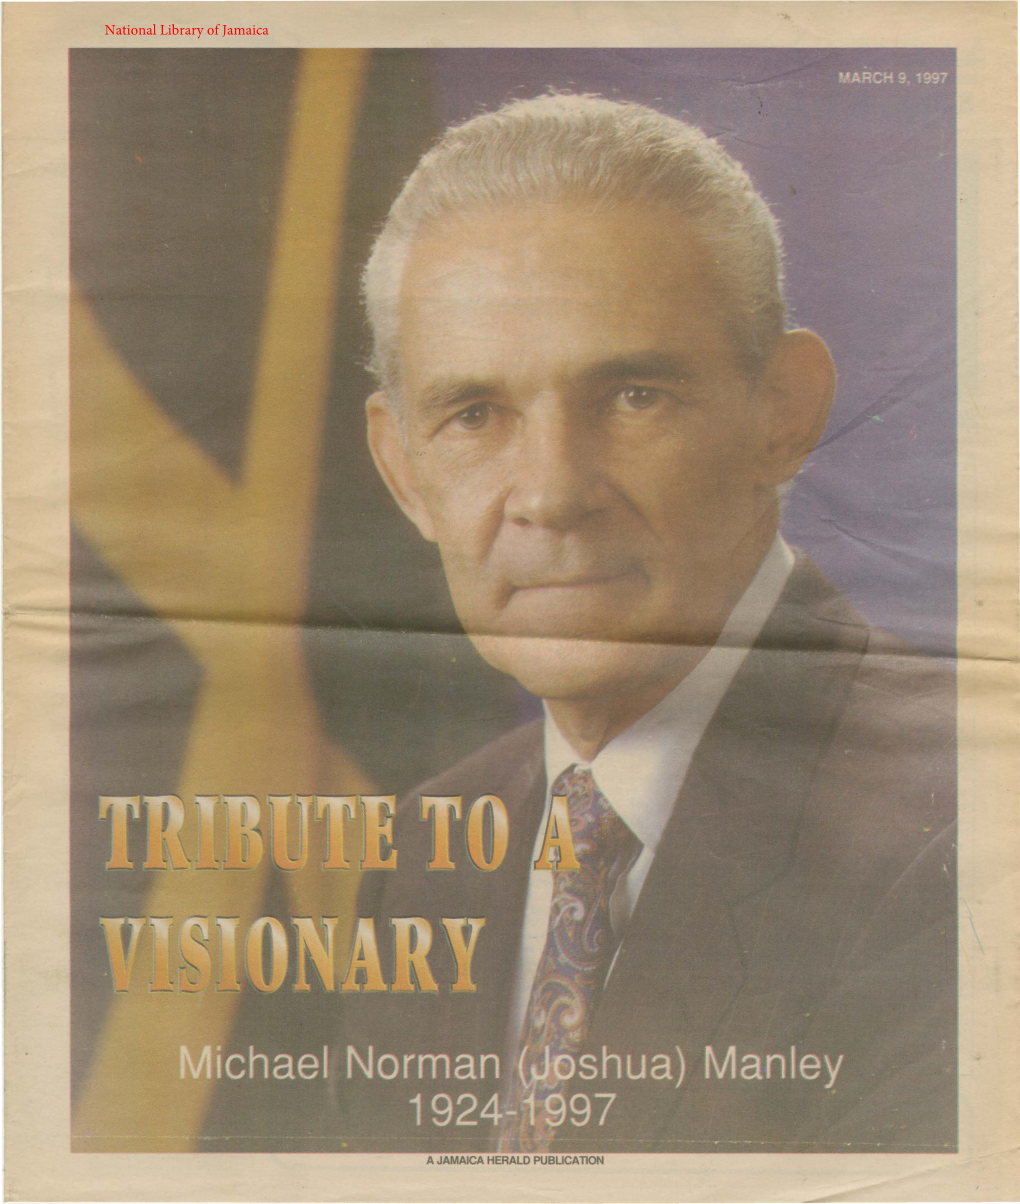 Tribute to a Visionary: Michael Norman (Joshua) Manley, 1924-1997